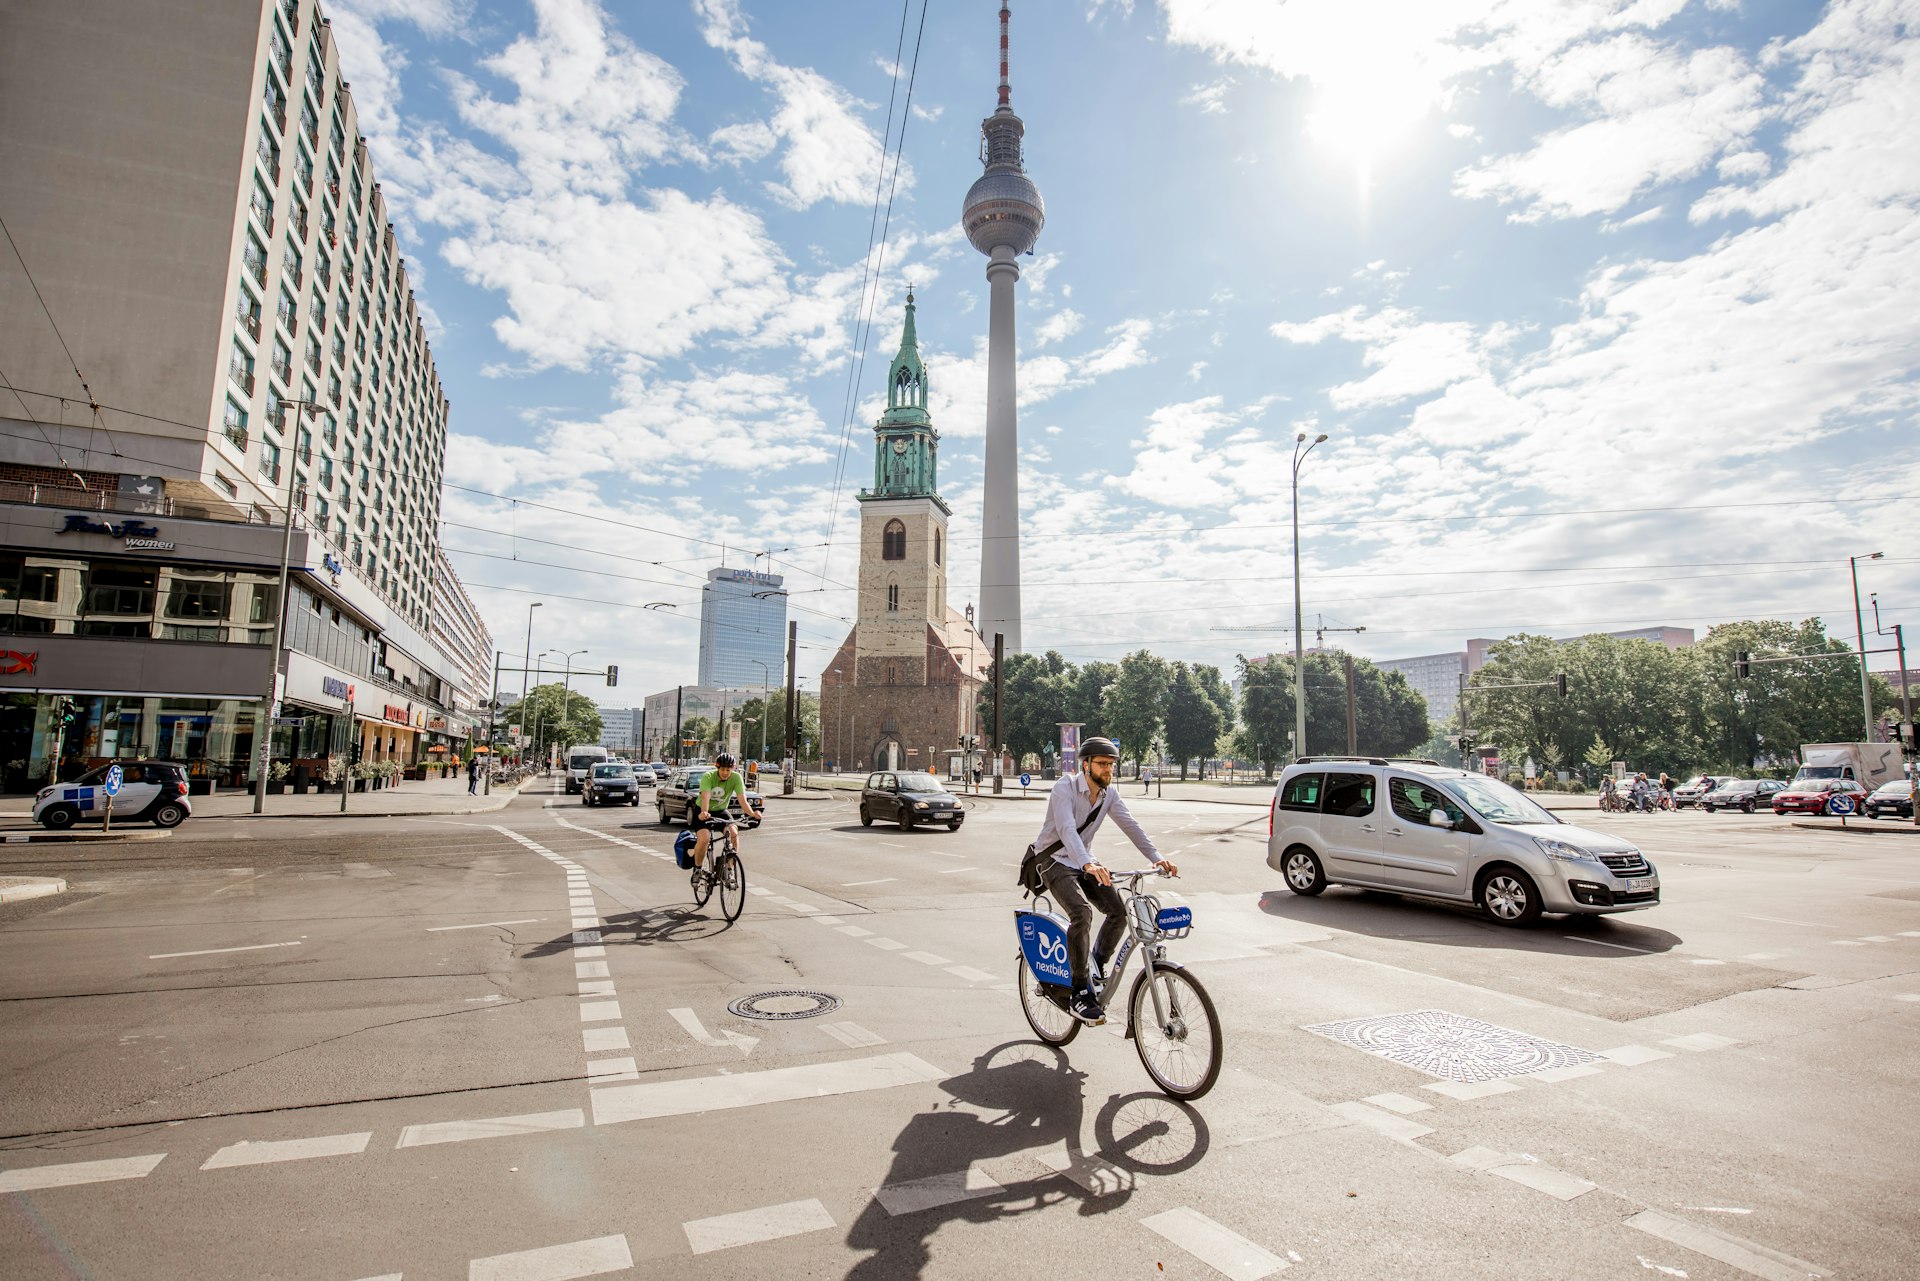 Cyclists and traffic travel in front of Saint Mary's church and the television tower (Fernsehturm) in the morning